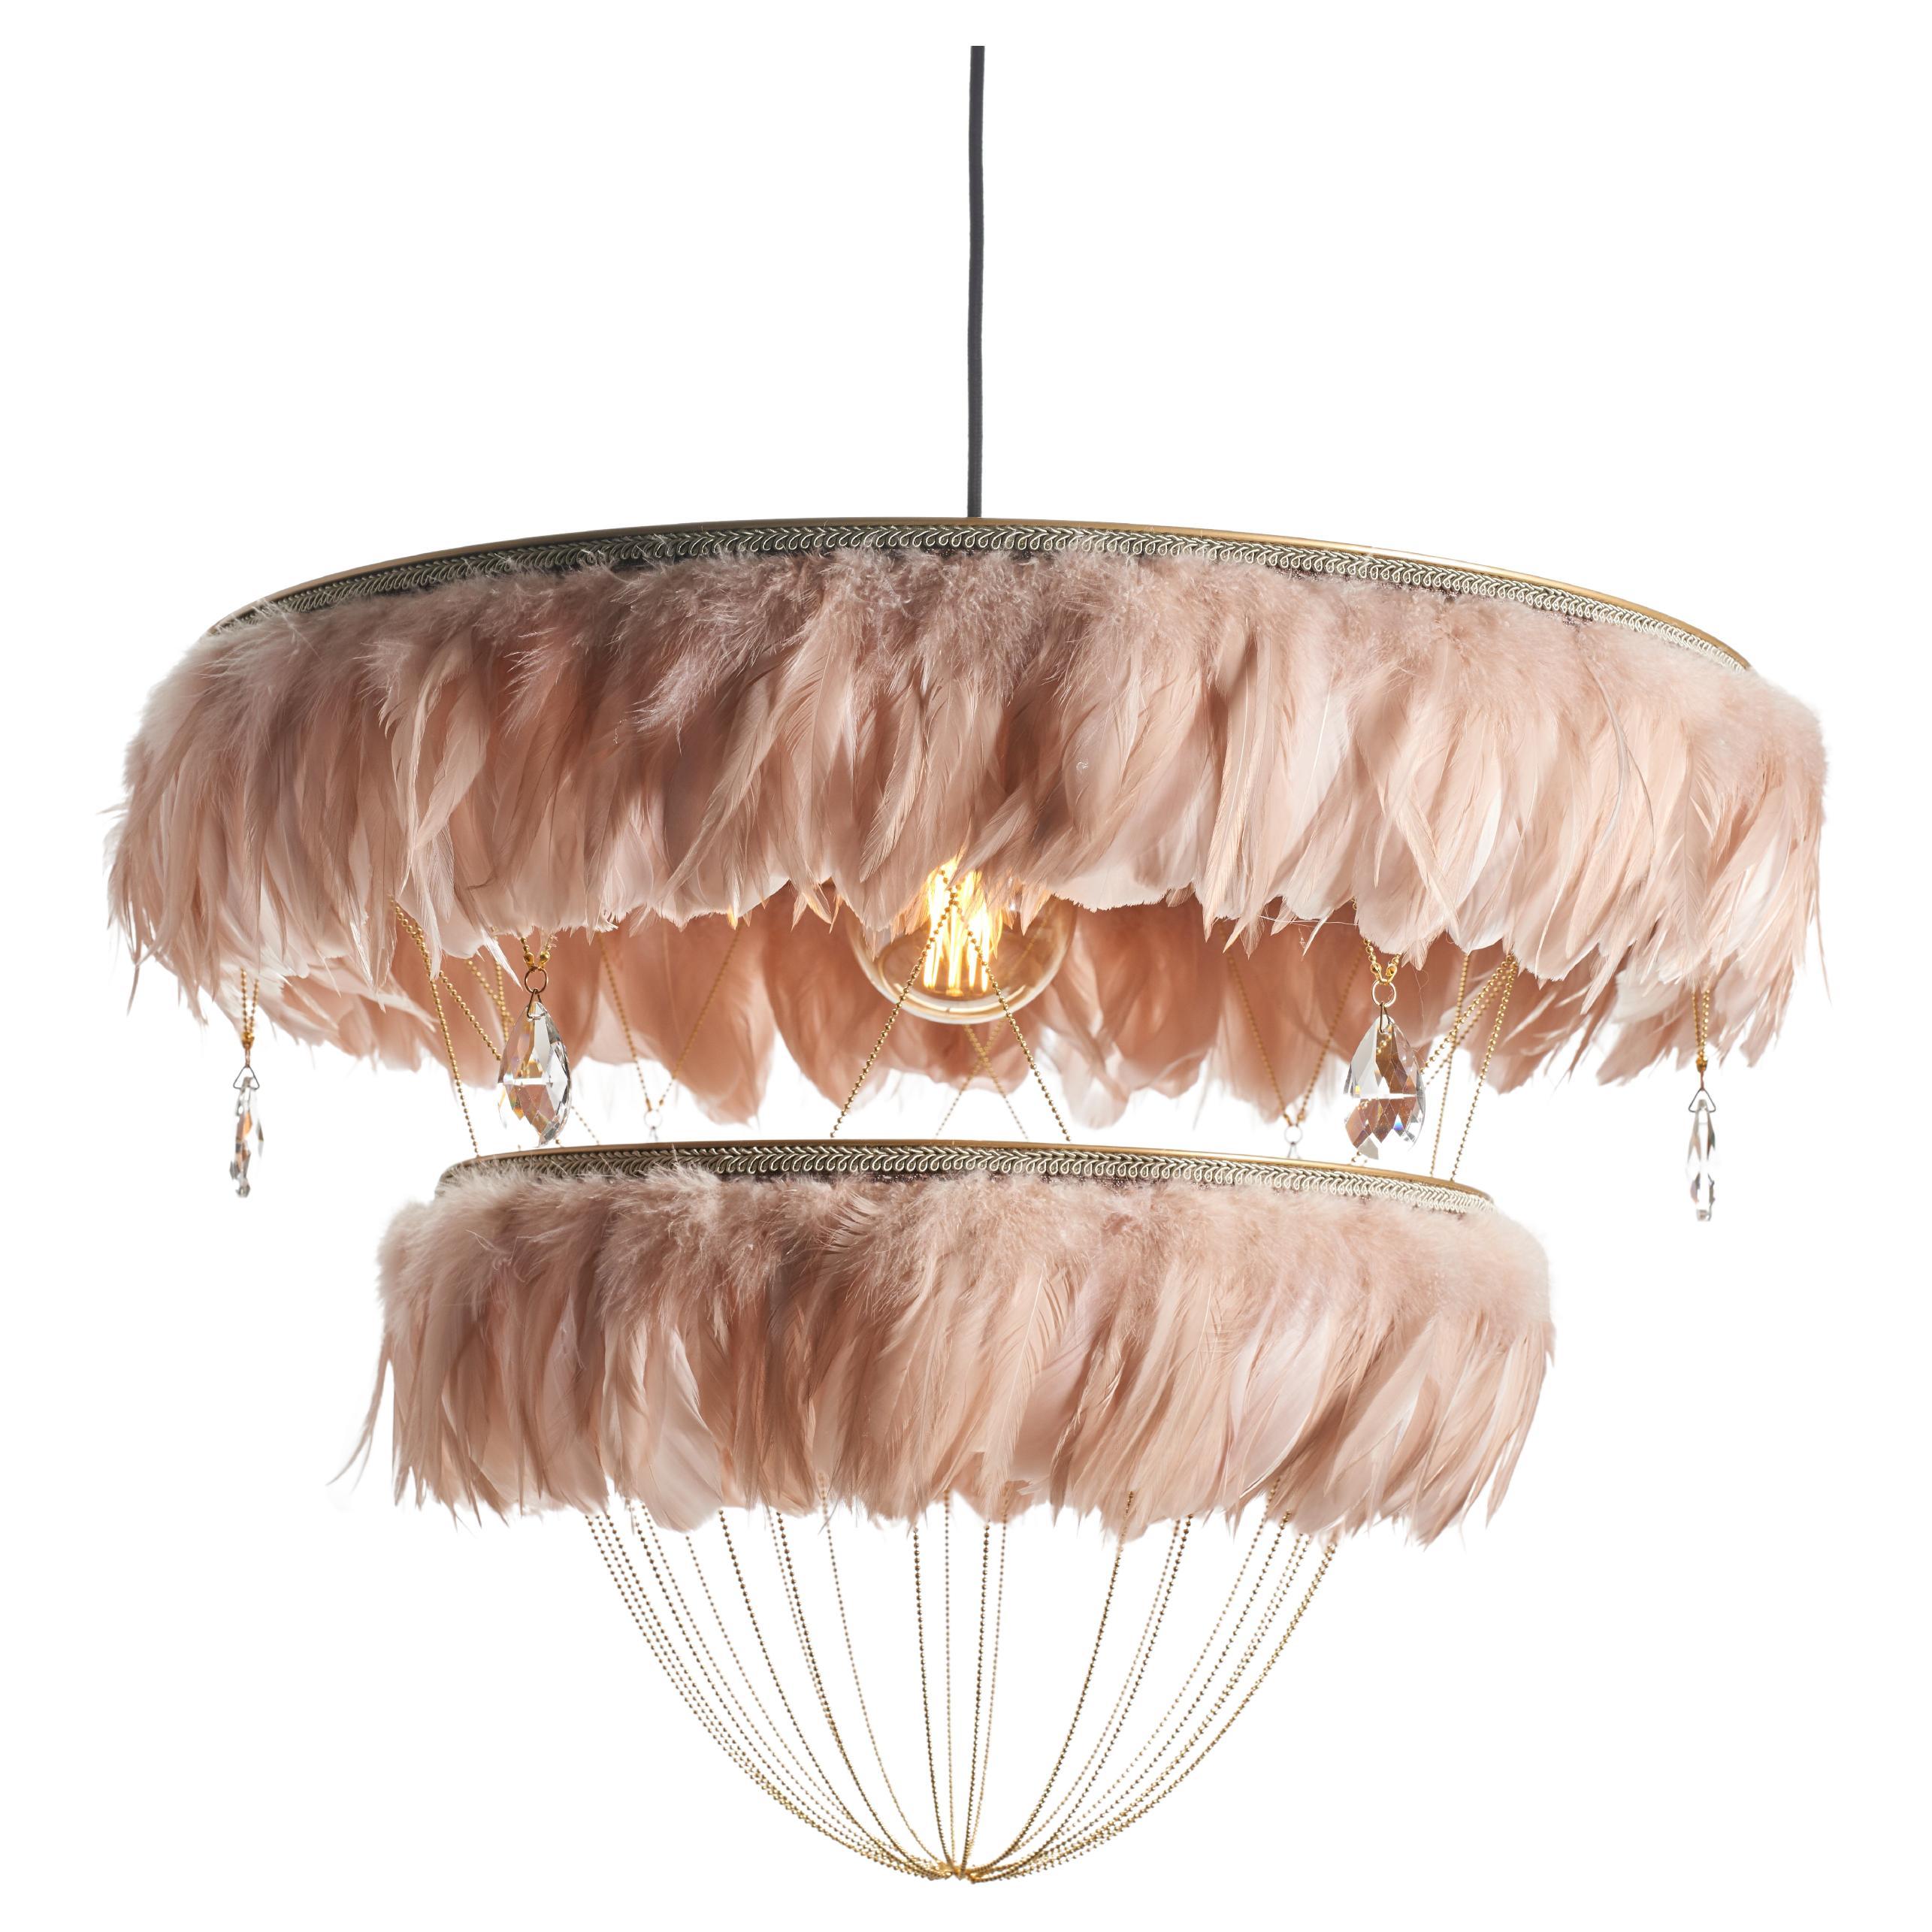 Feather Chandelier in Blush Pink - Bertie -  Hand Made to order in London.  For Sale